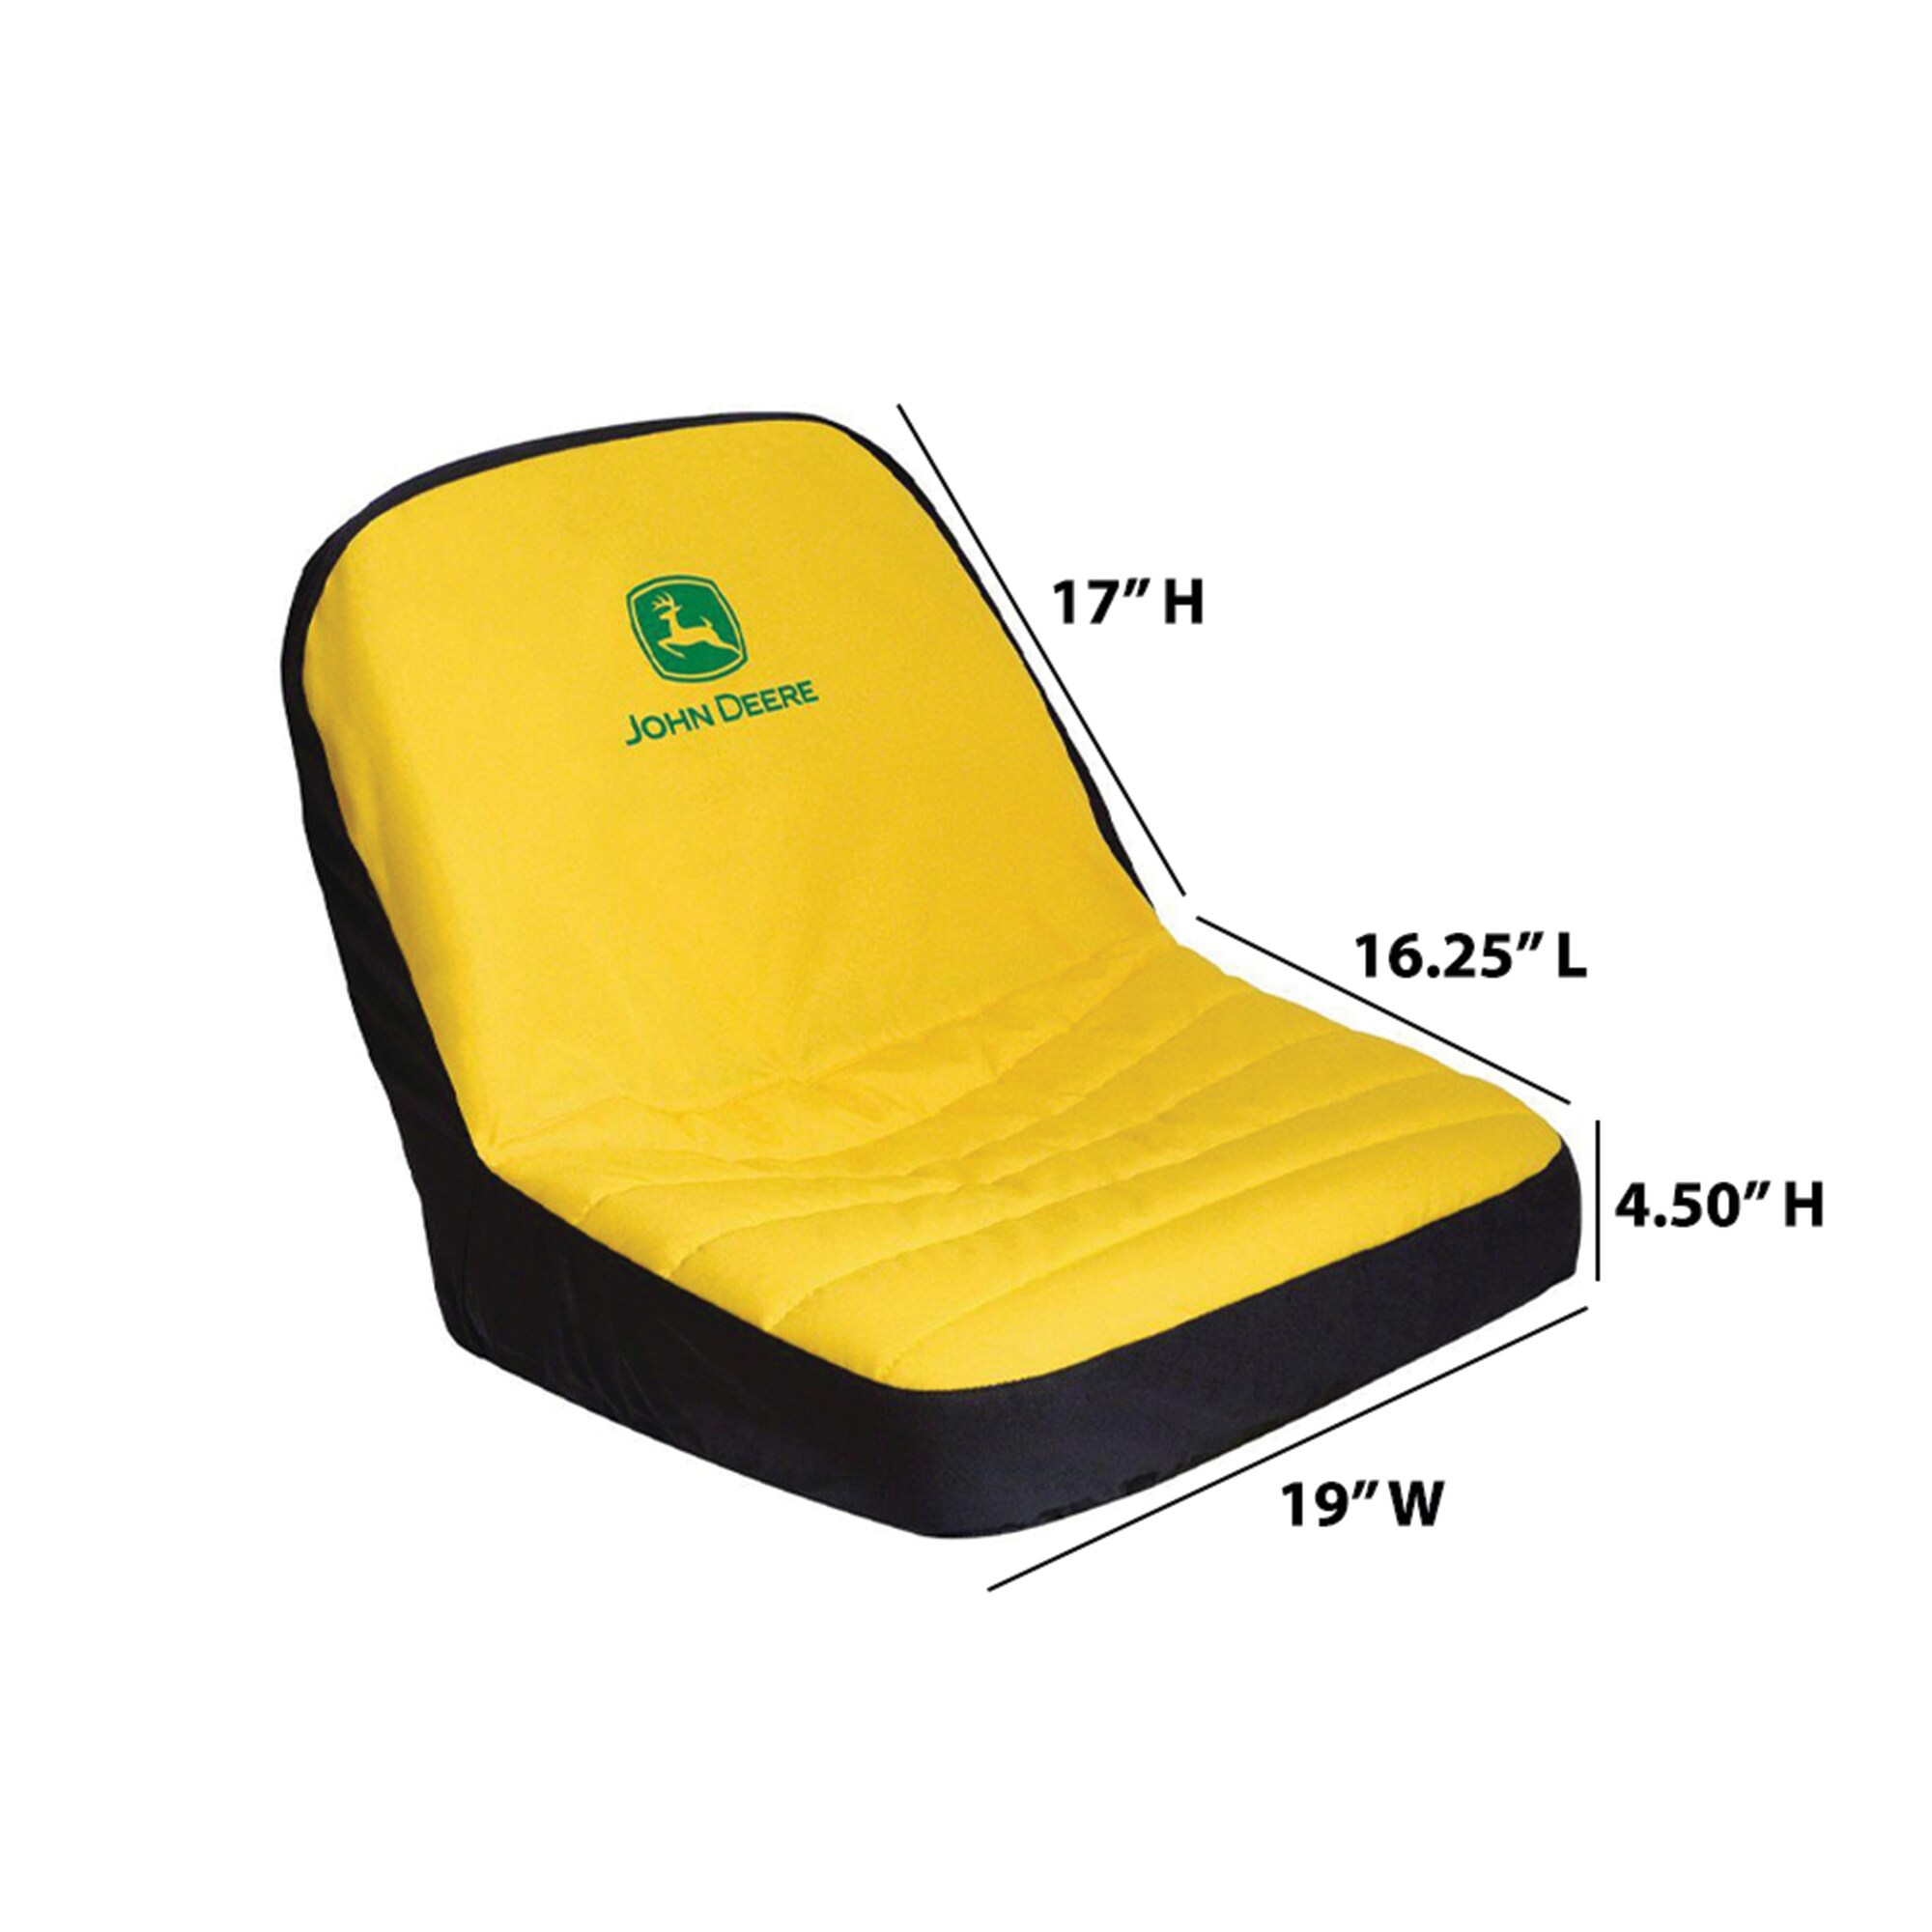 Lawn Mower Seat Cover, Riding Mower Seat Cover Cushion Replacement with  Padded Waterproof Garden Tractor Seat Cover for Cub Cadet Troy Bilt  Craftsman